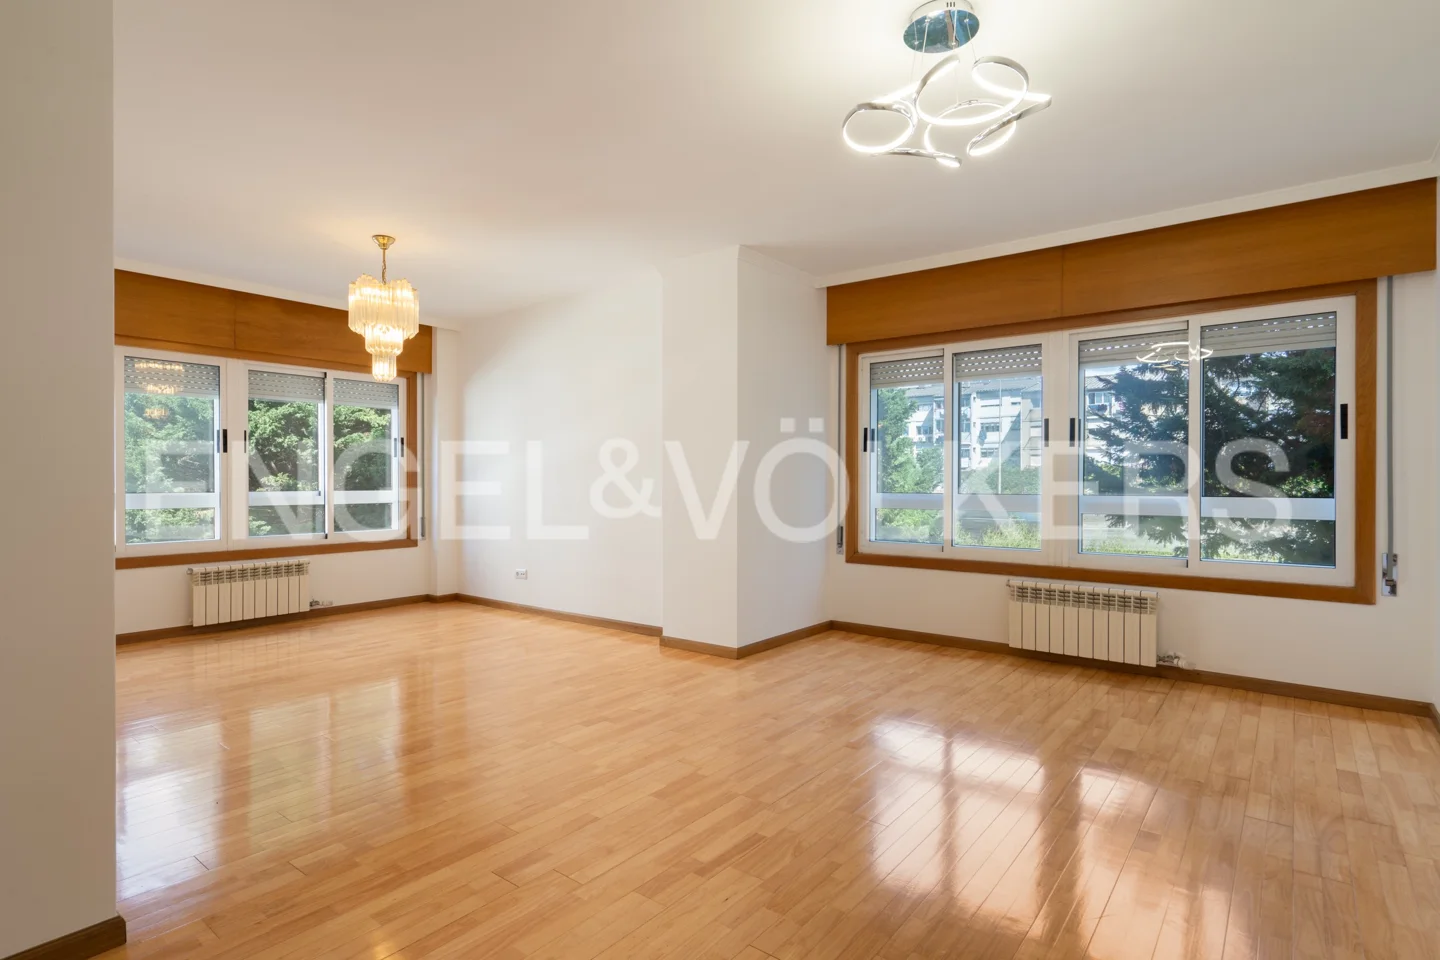 3+1 Bedroom Apartment completely renovated